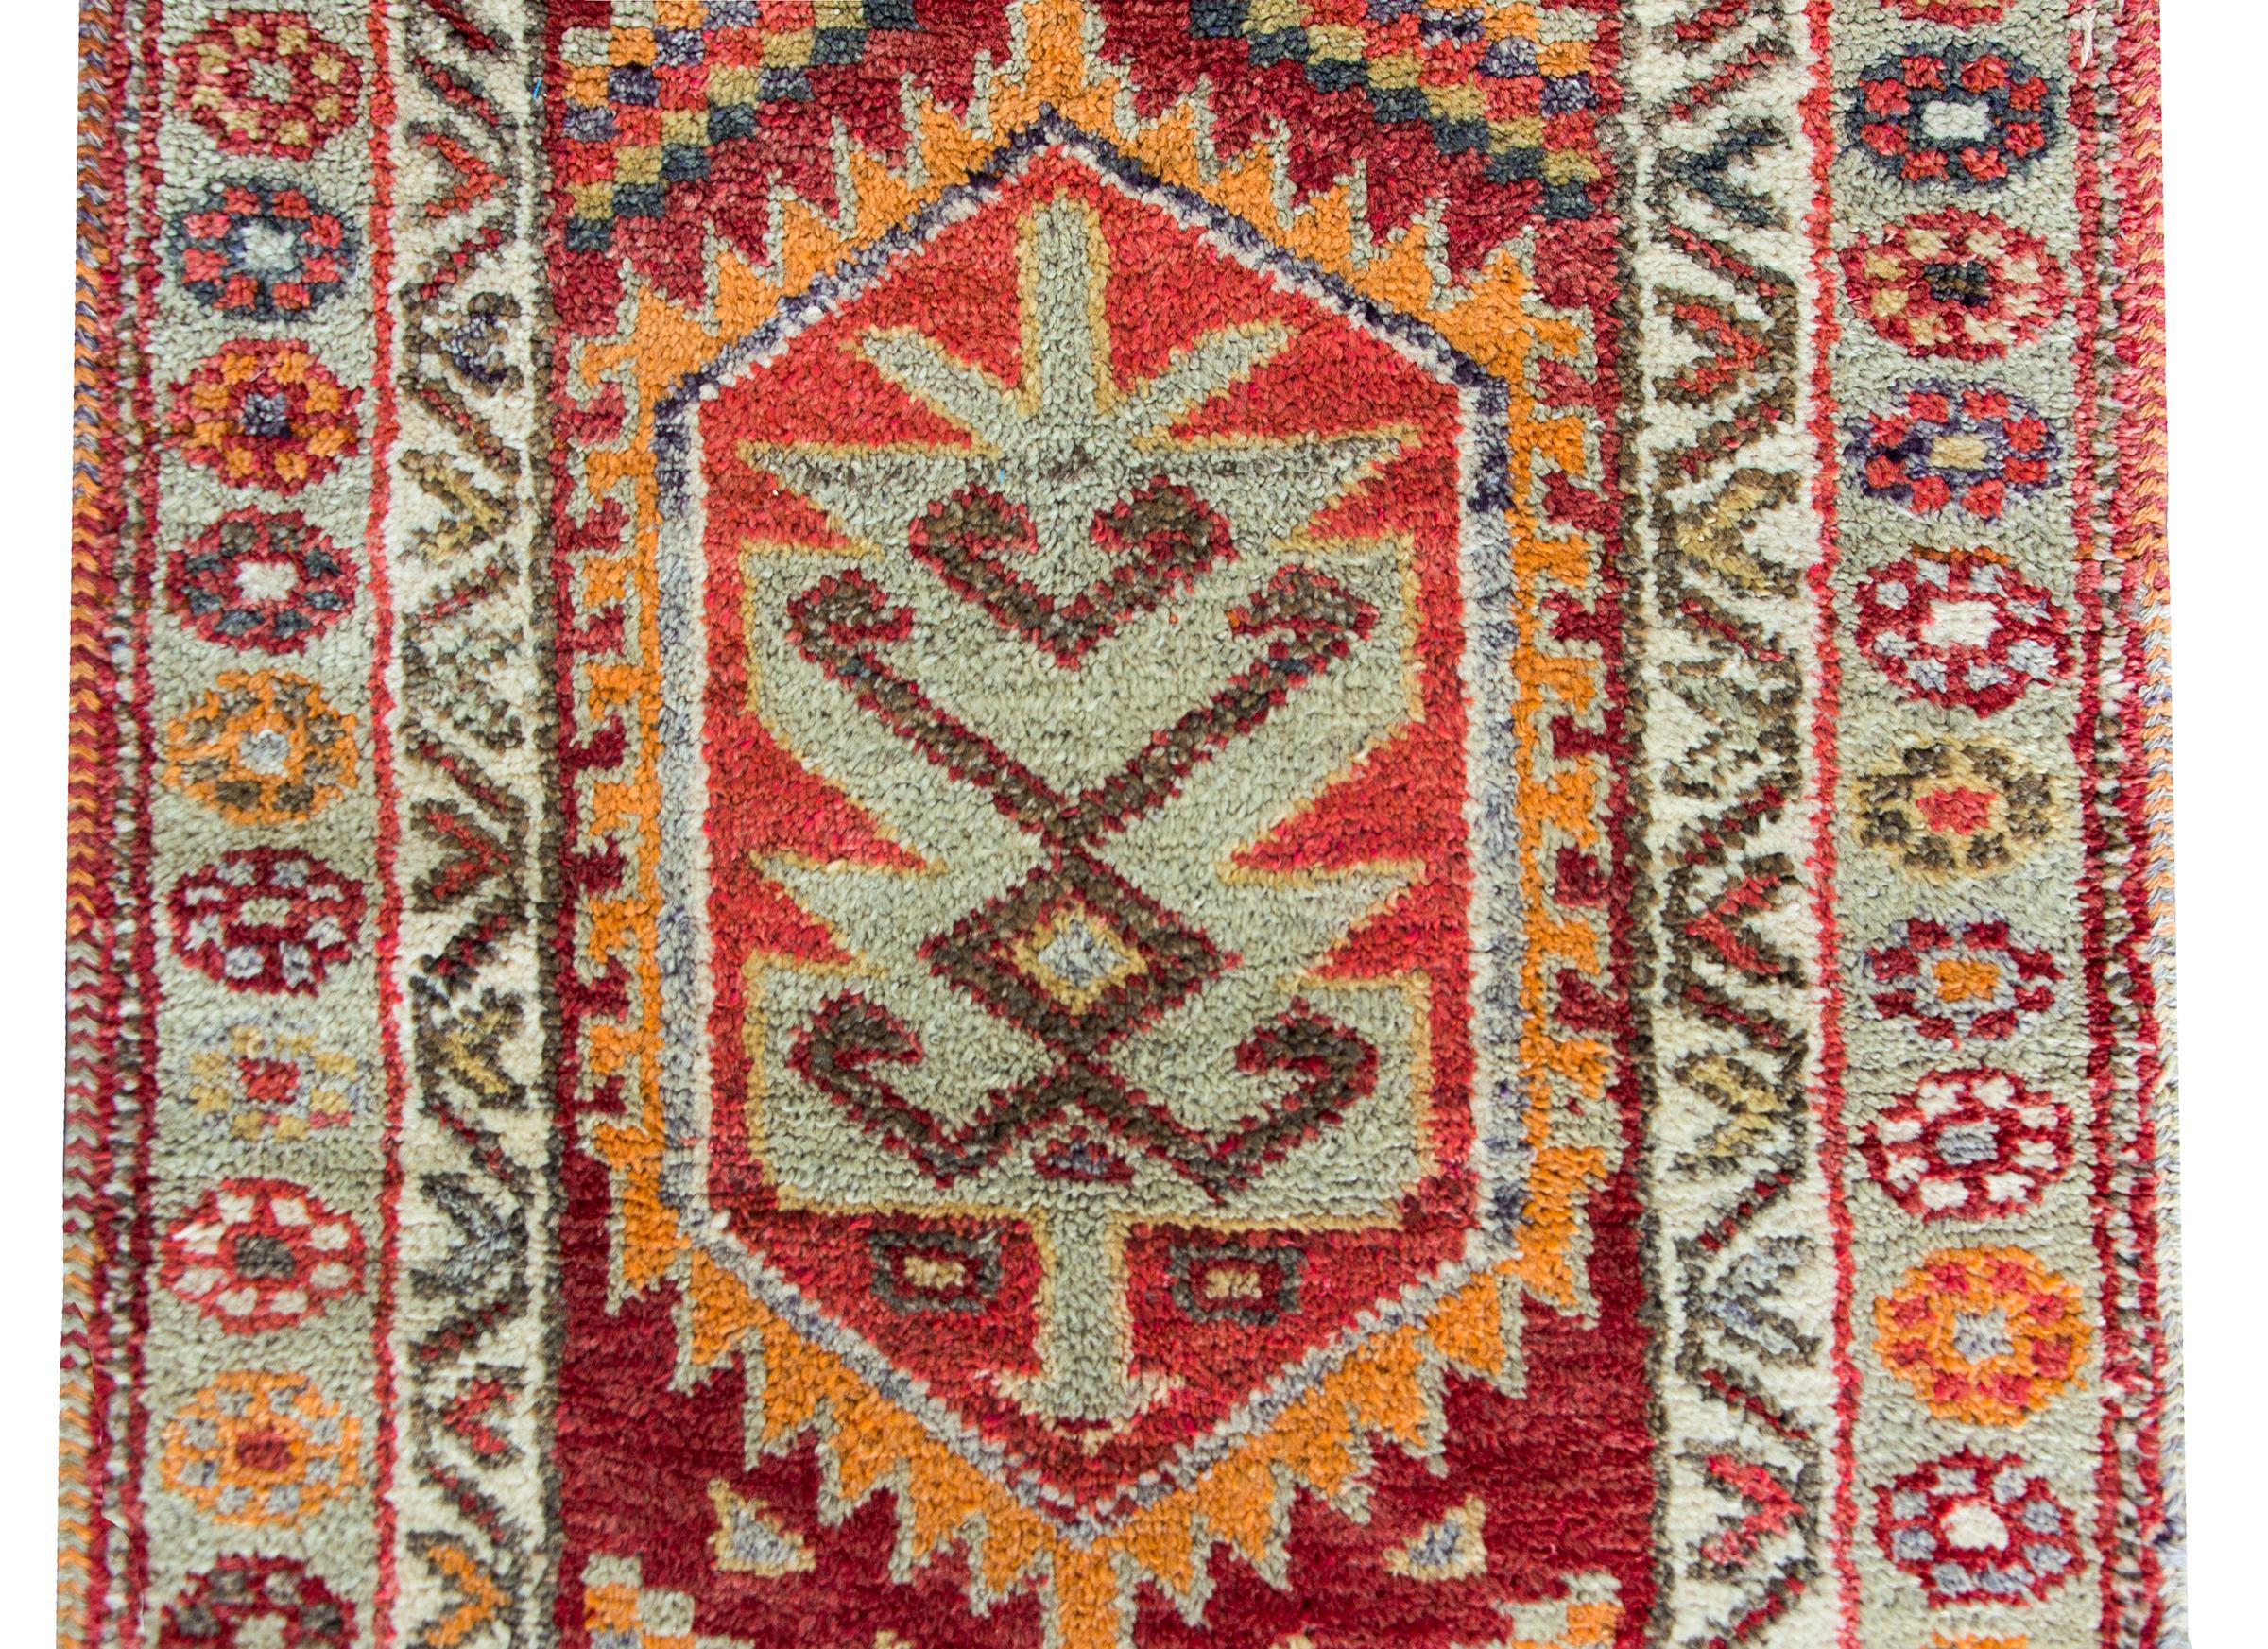 A gorgeous Mid-20th Century Turkish Konya runner with the best Large Scale stylized flowers and geometric shapes woven in brilliant crimsons, oranges, light indigos, pinks, and whites, and surrounded by a border with more smaller stylized flowers.